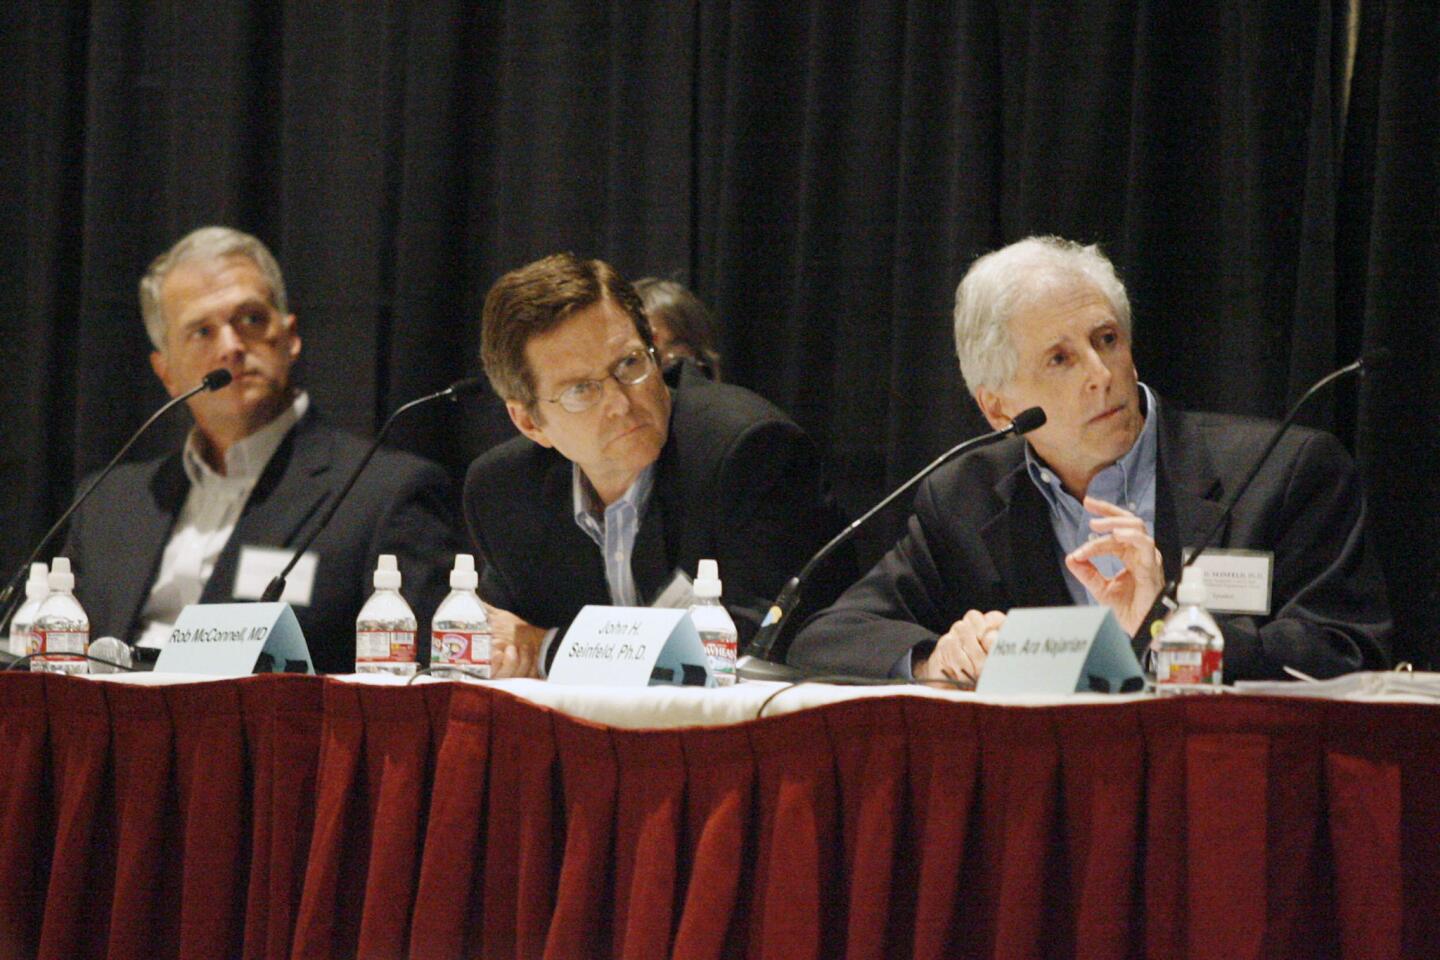 Dr. John Seinfeld, right, attends a panel discussion about the 710 freeway extension, which took place at the Pasadena Convention Center on Tuesday, September 18, 2012.